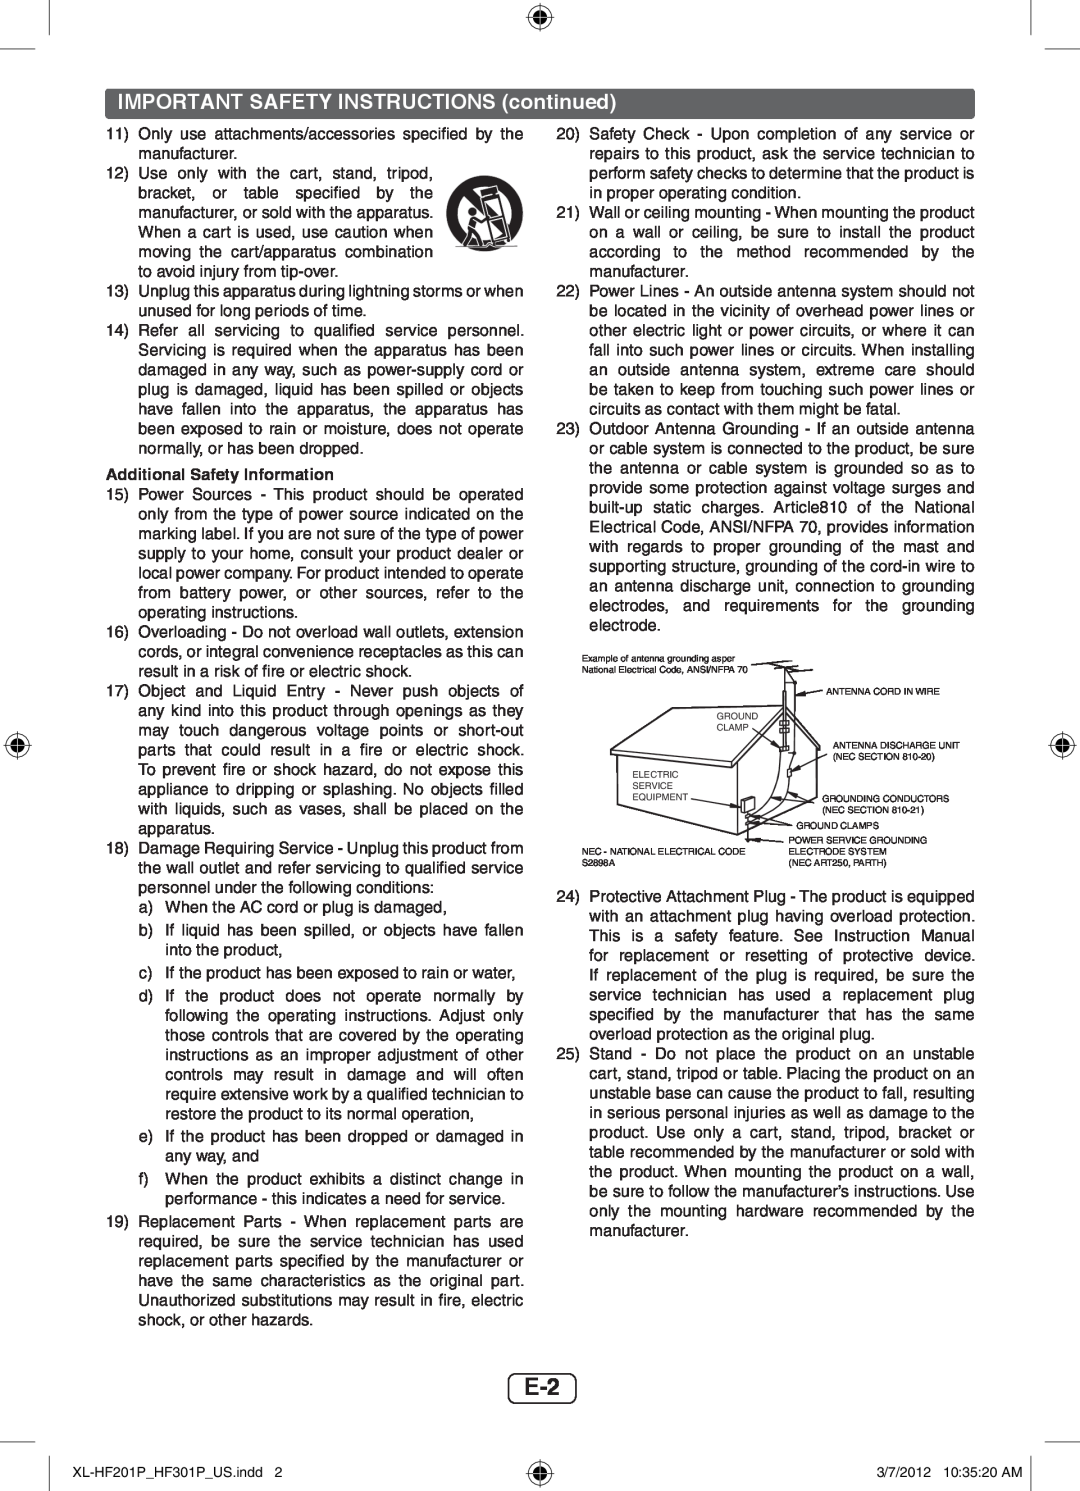 Sharp XLHF201P operation manual IMPORTANT SAFETY INSTRUCTIONS continued 